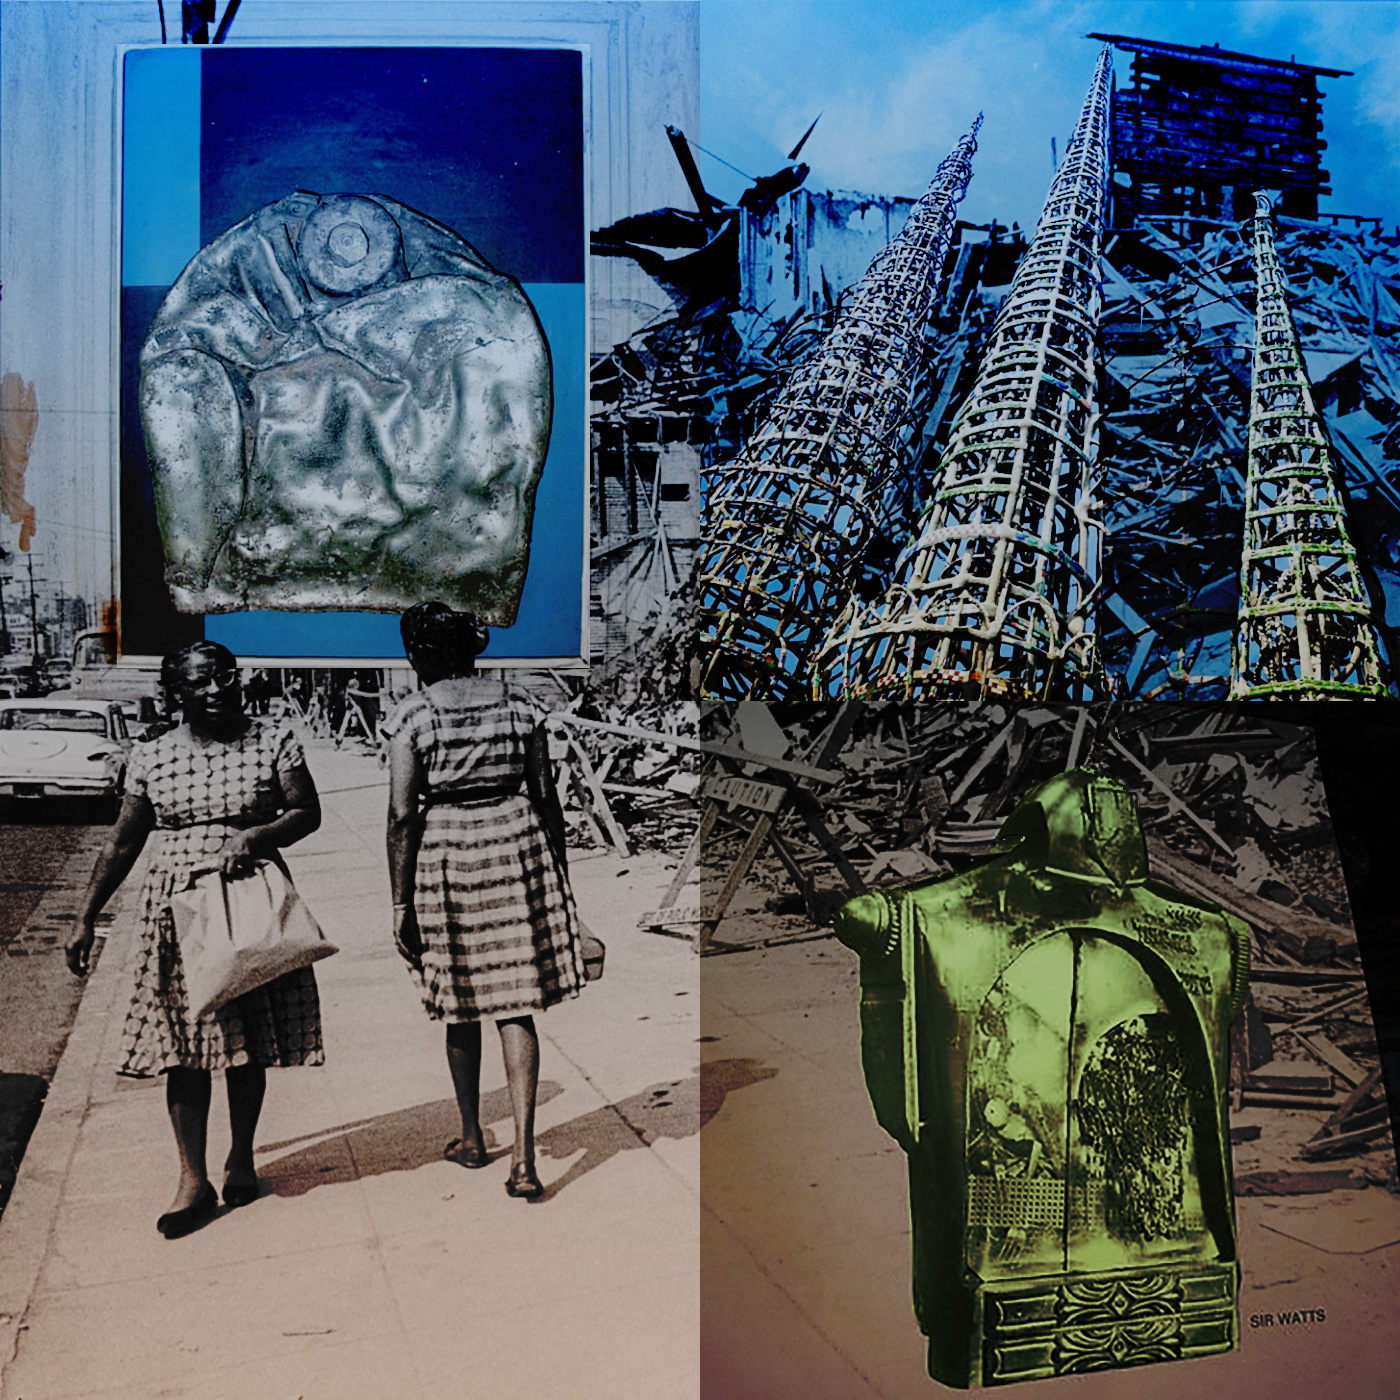 collaged image of two people wearing dresses walking down the street, along with three sculptural artworks